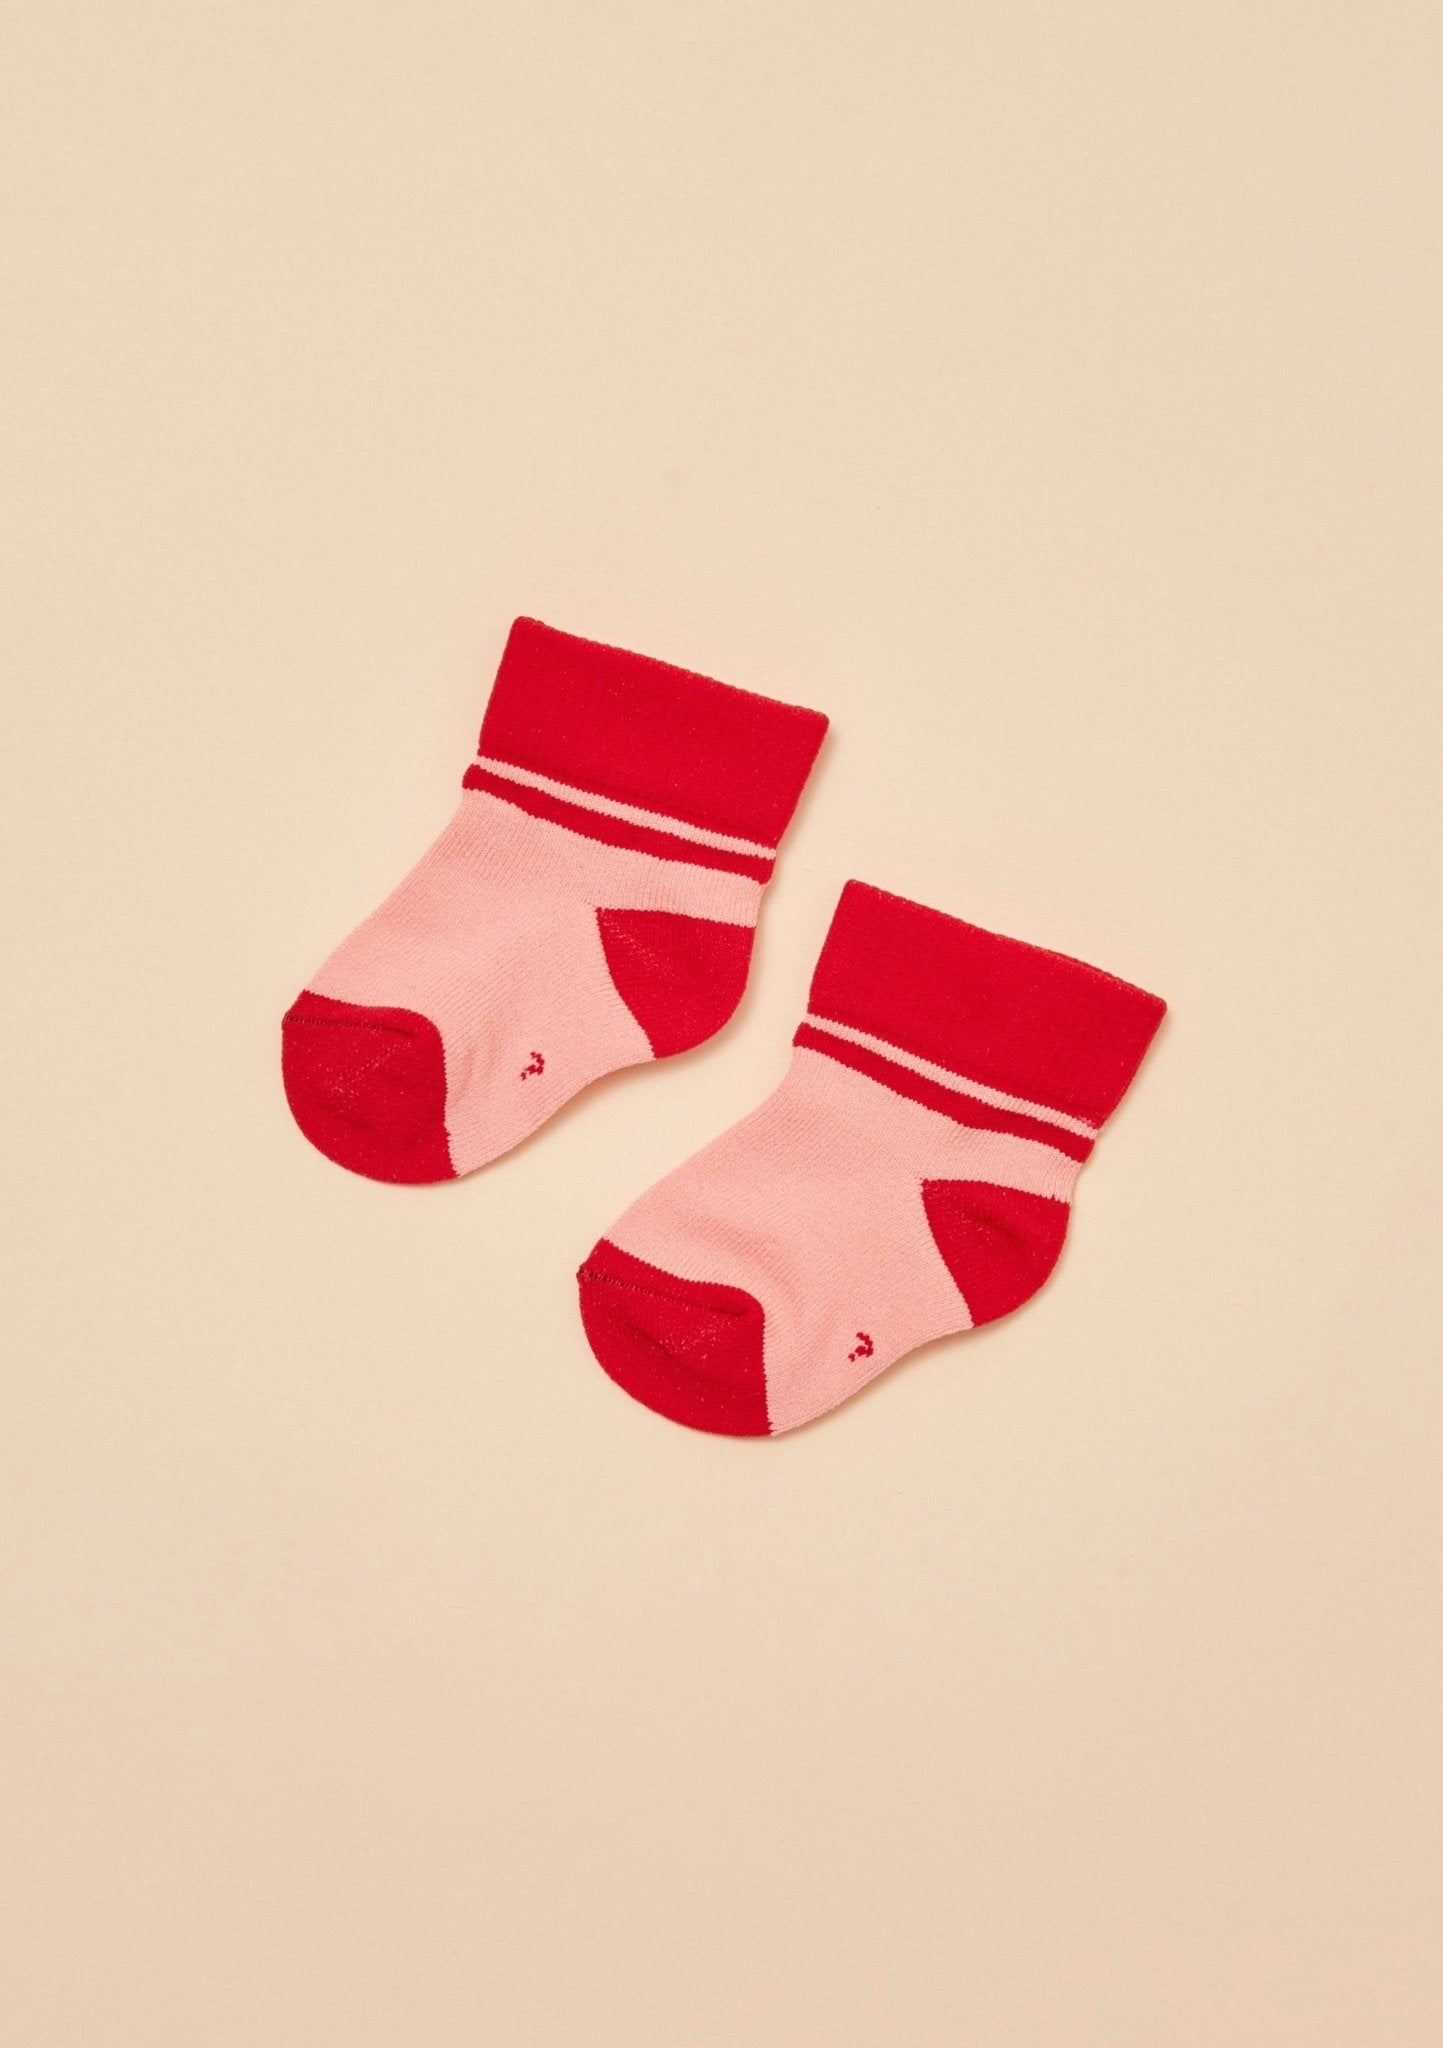 TheRY ultra soft baby socks cherry red/peach colour flatlay